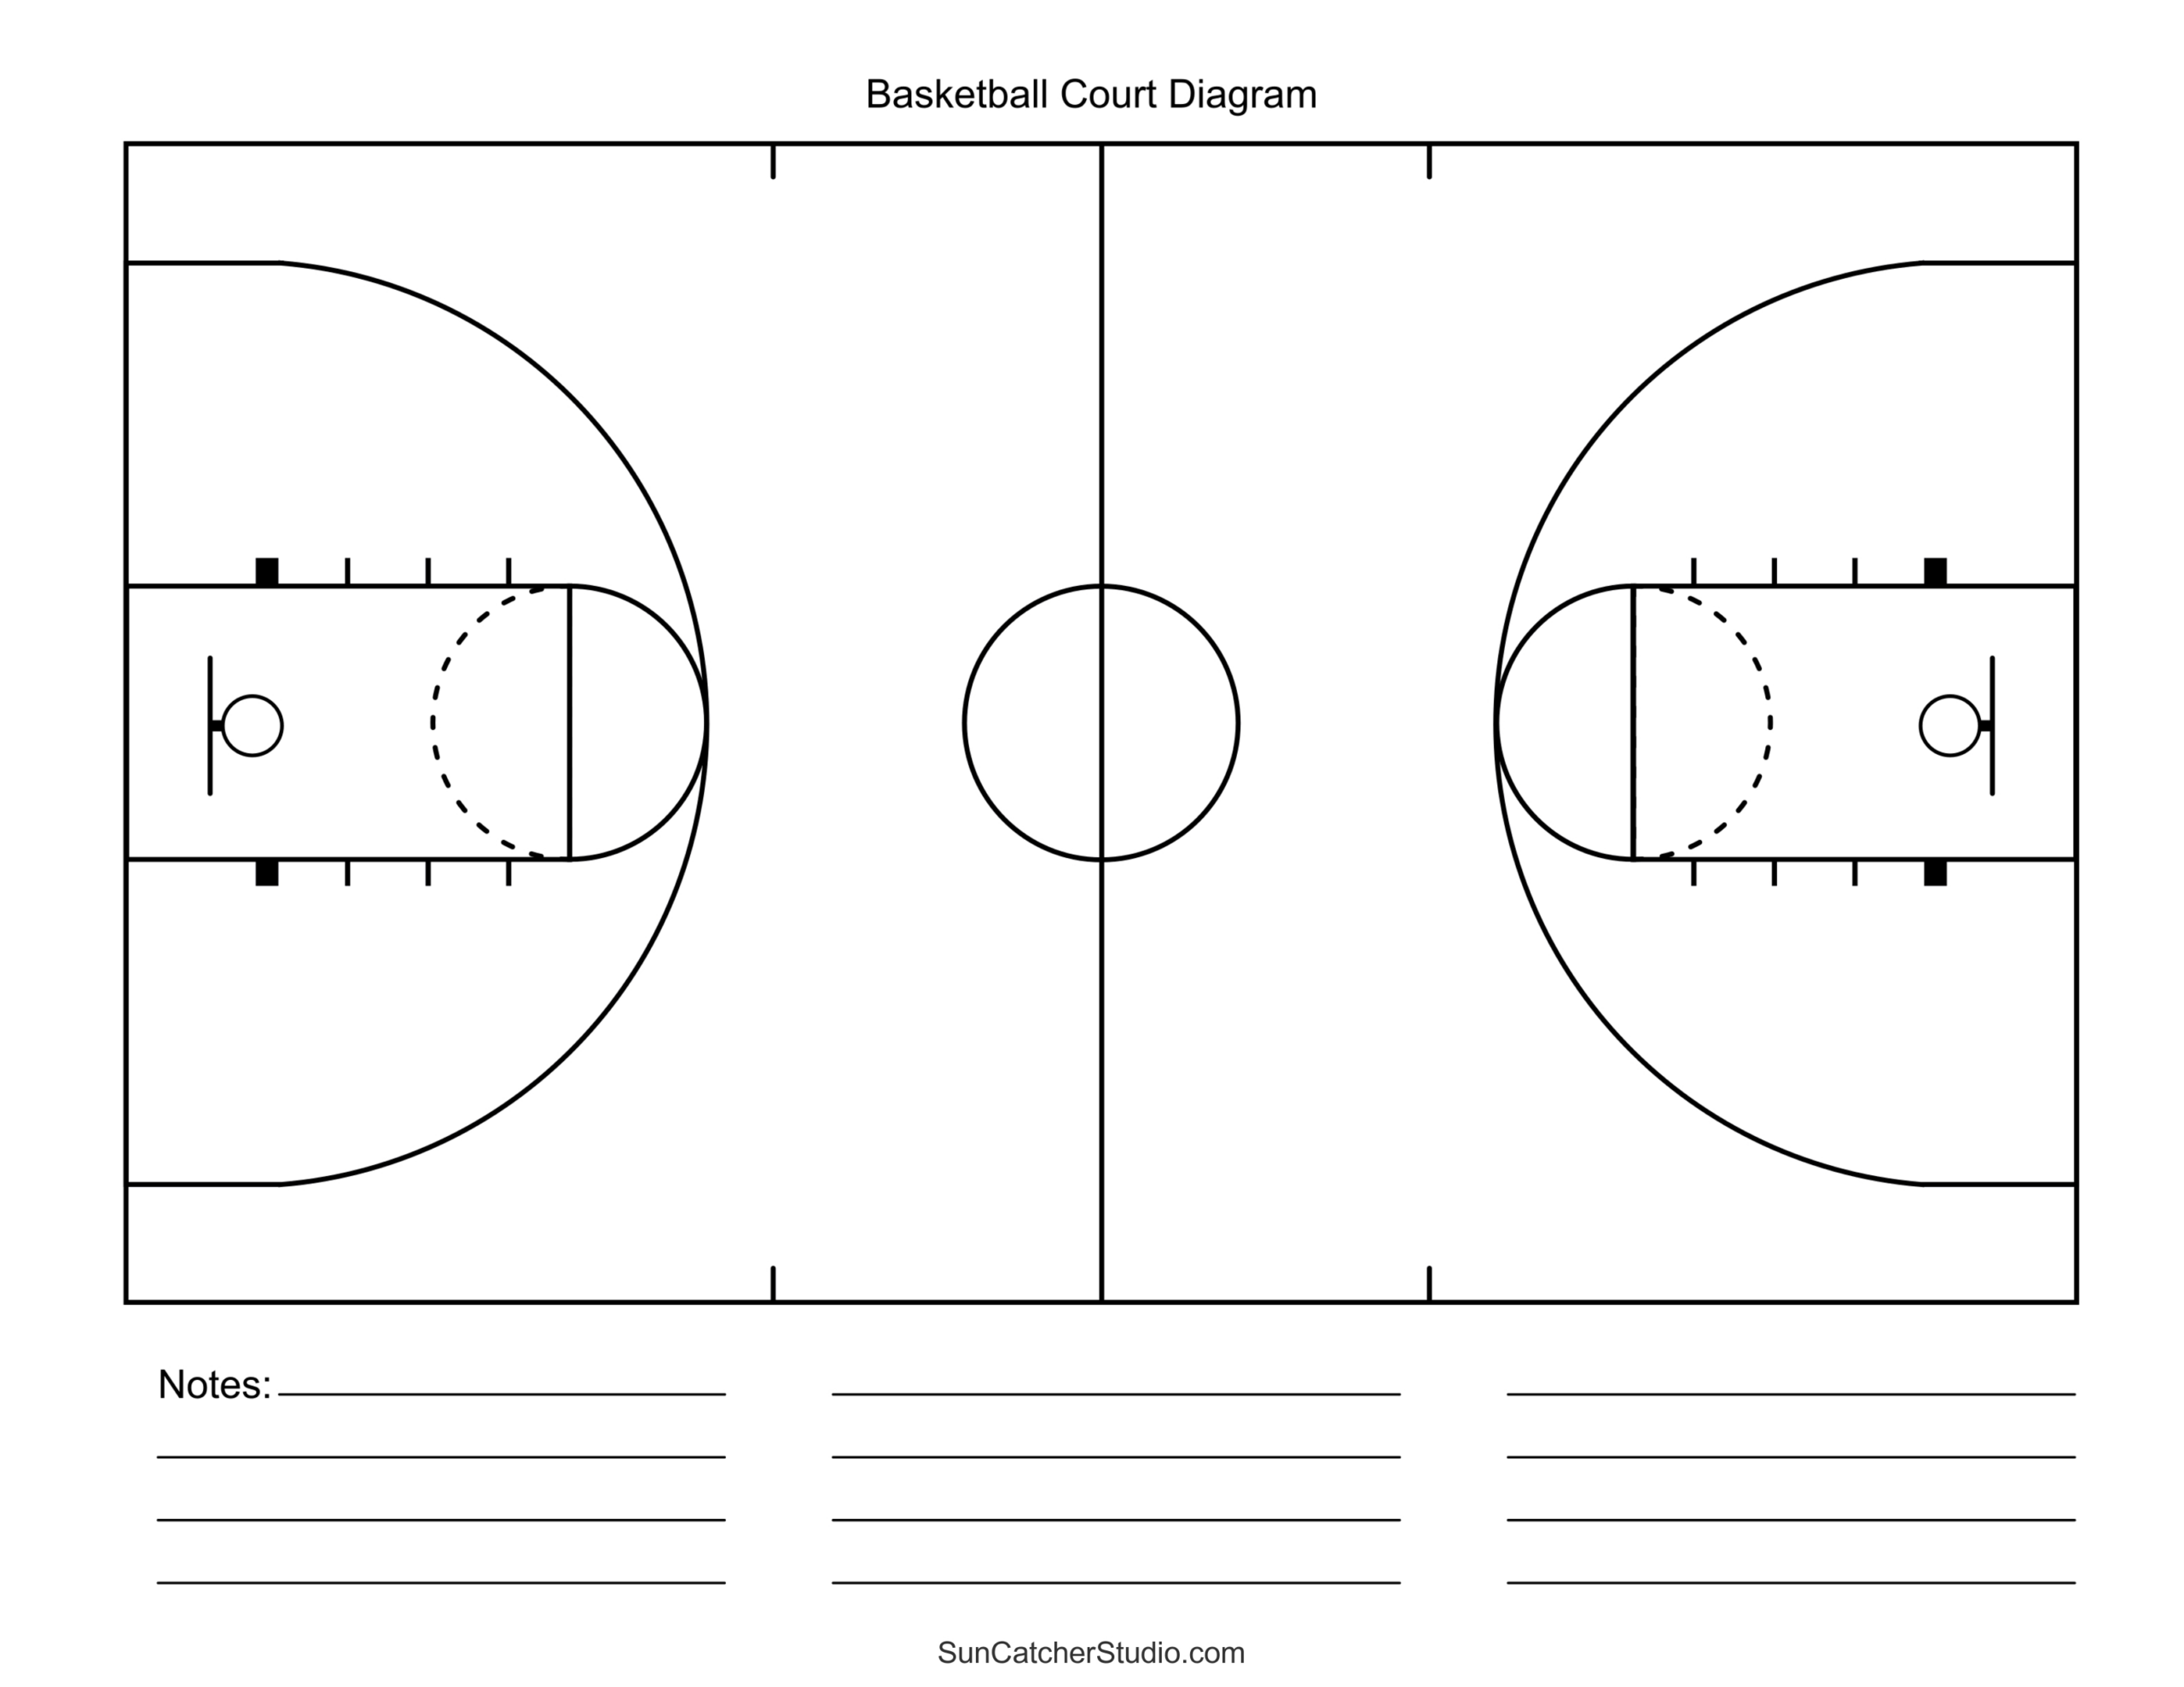 Free Printable Basketball Court Diagrams &amp; Layout – Diy Projects pertaining to Free Printable Basketball Court